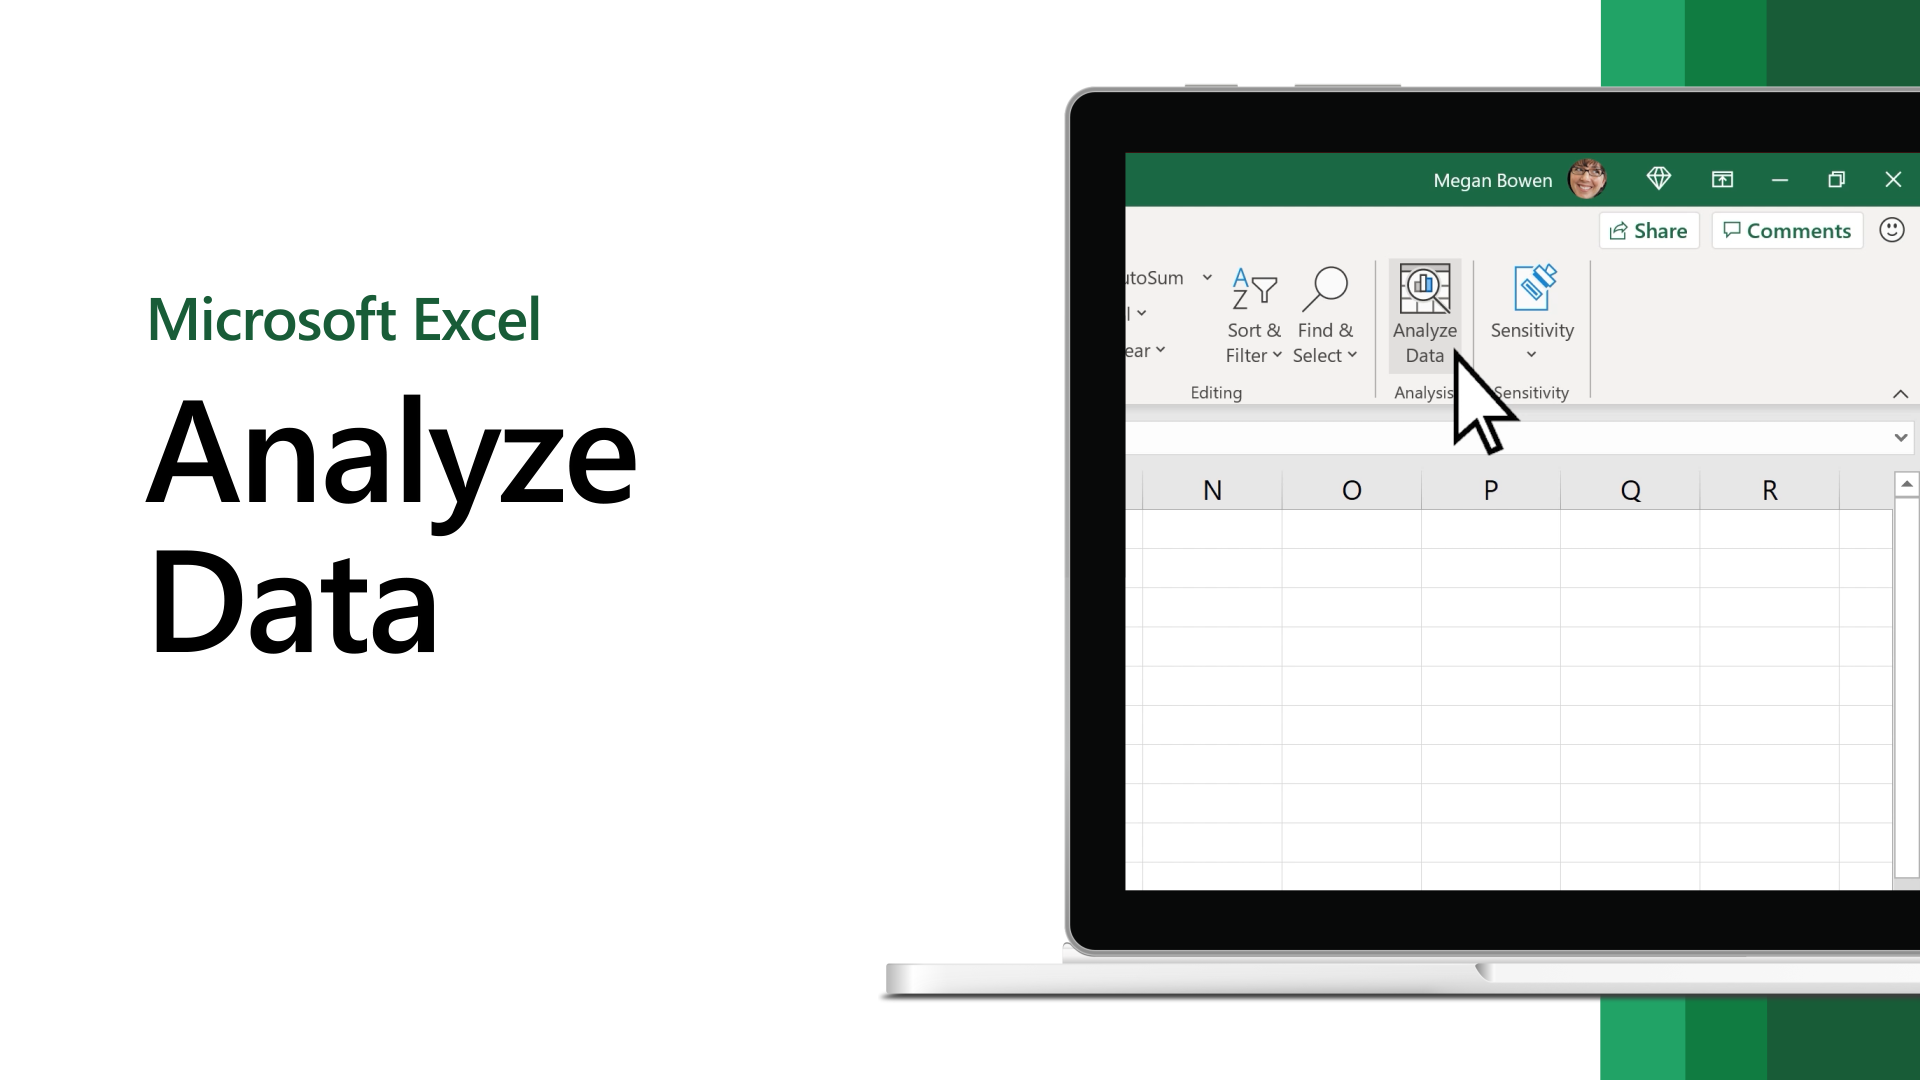 Microsoft Excel review